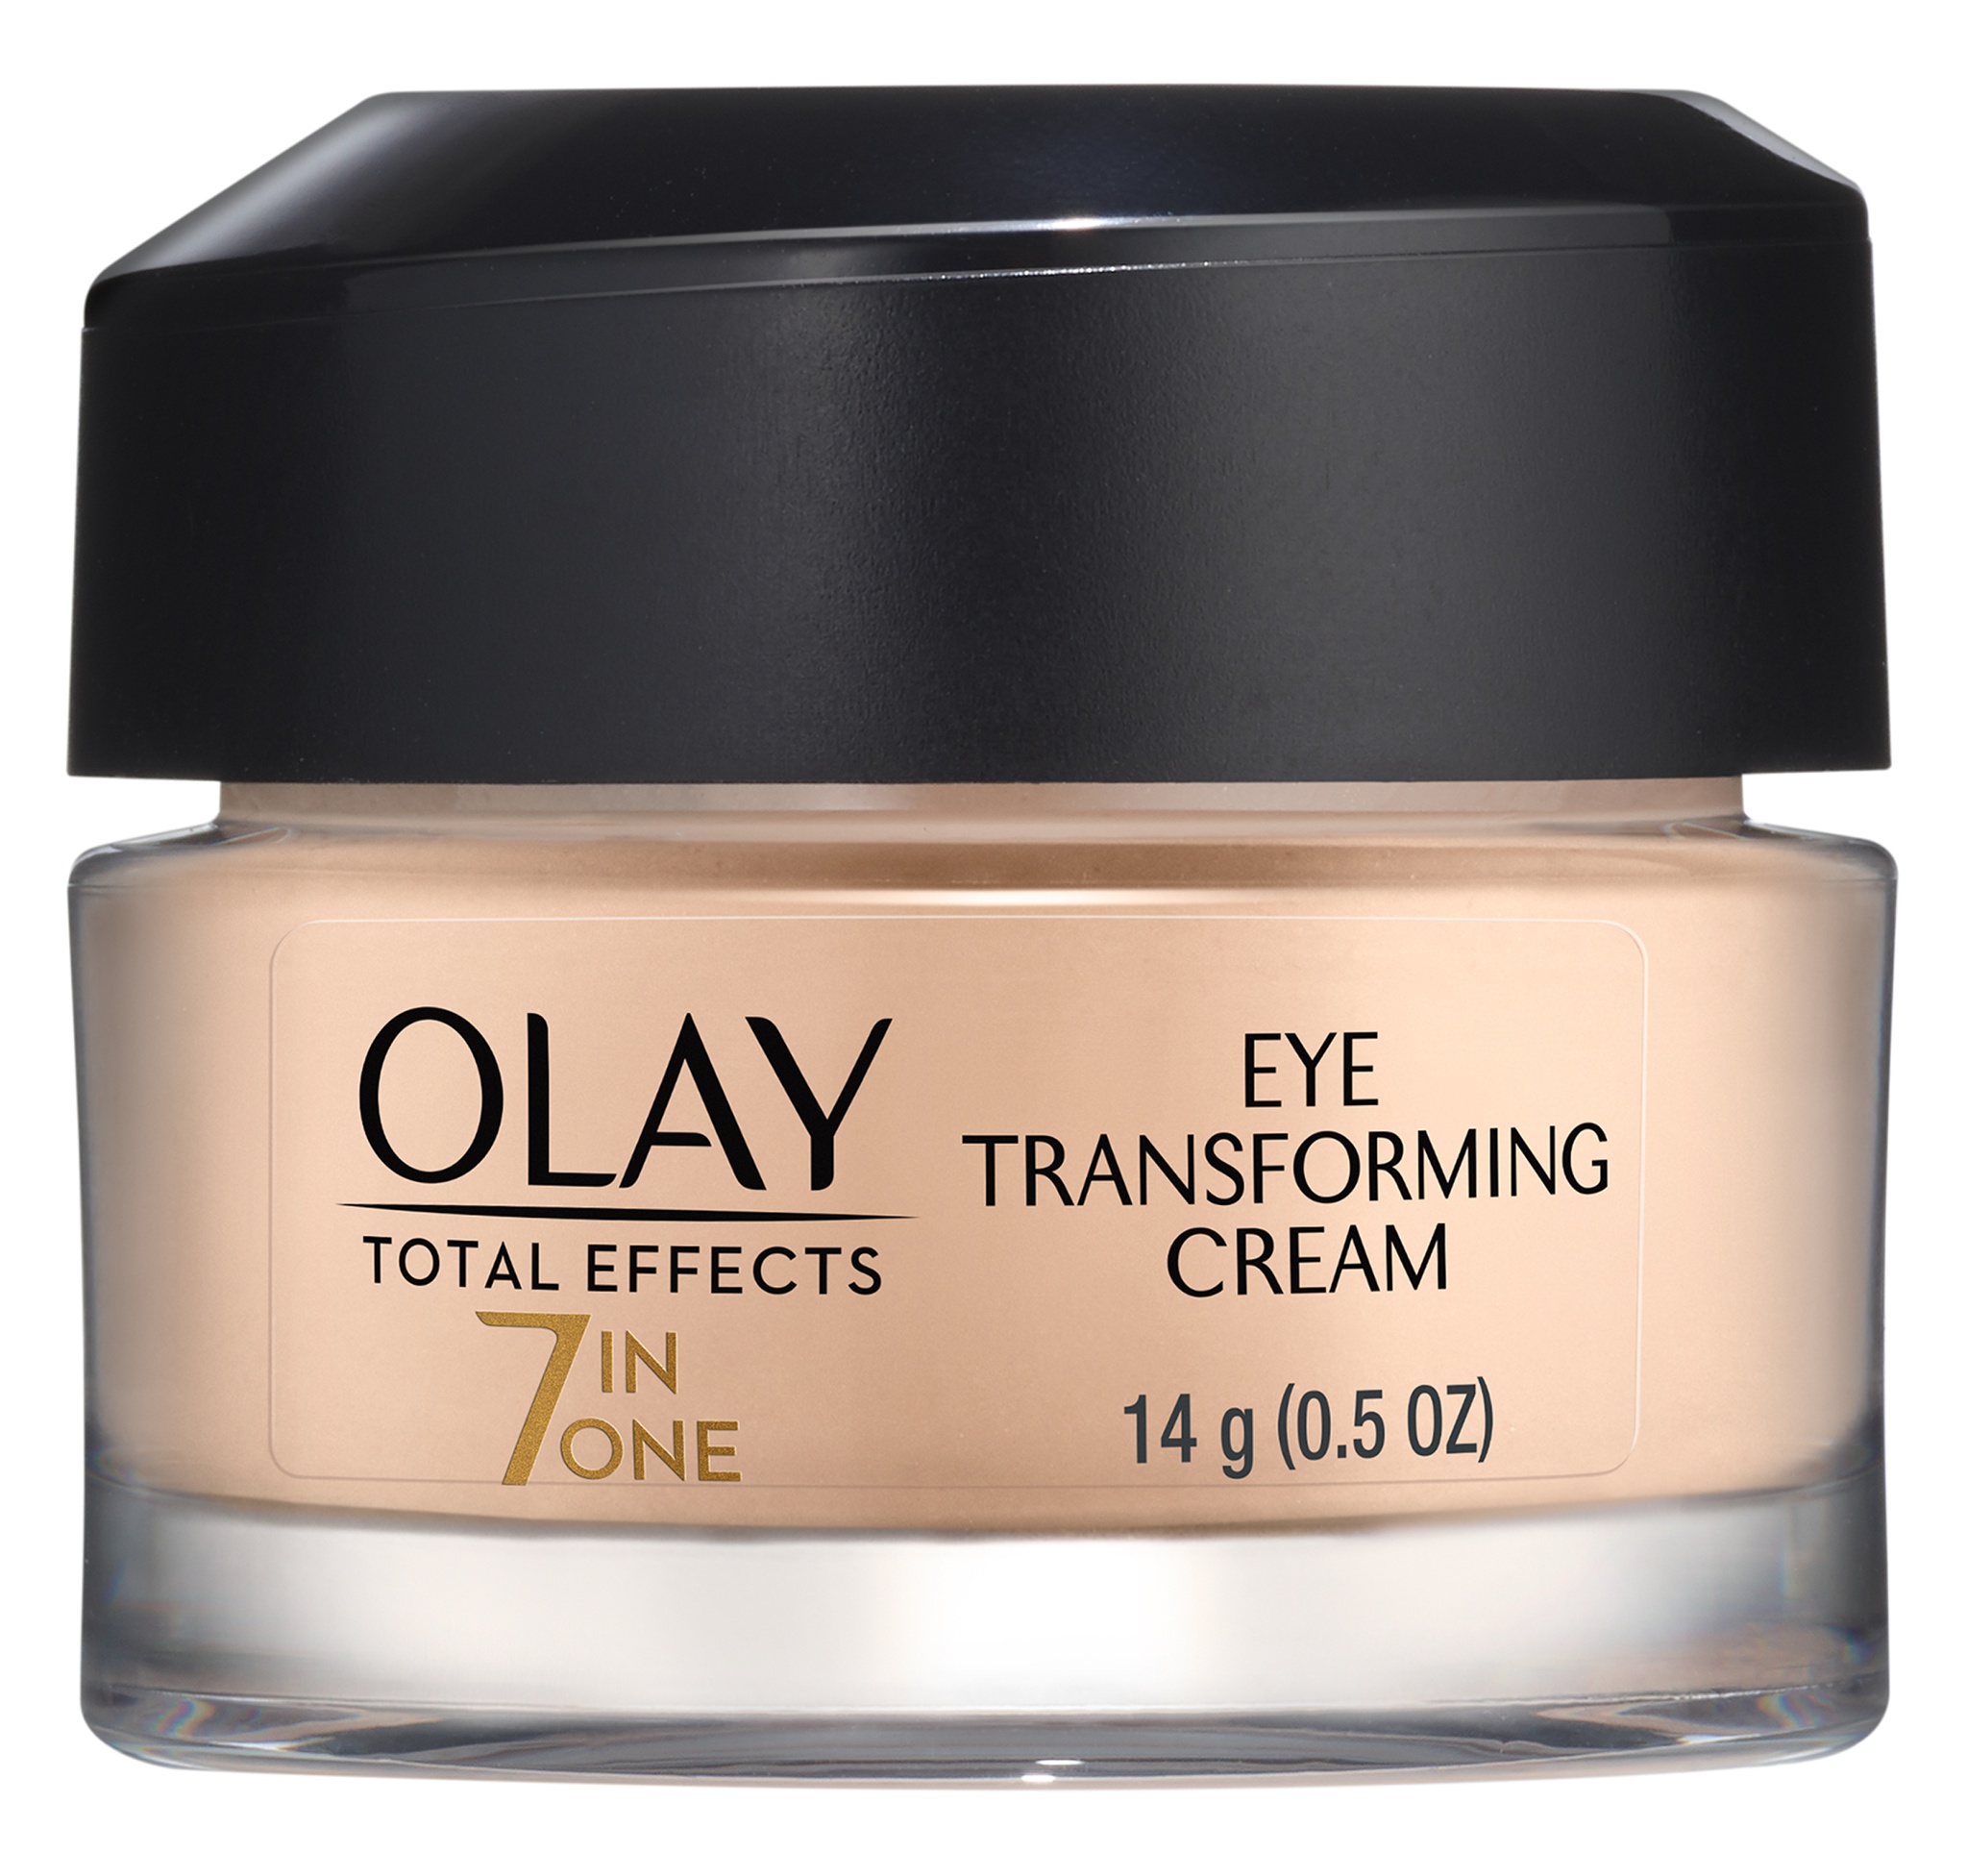 Olay Total Effects 7 In One Anti-aging Transforming Eye Cream